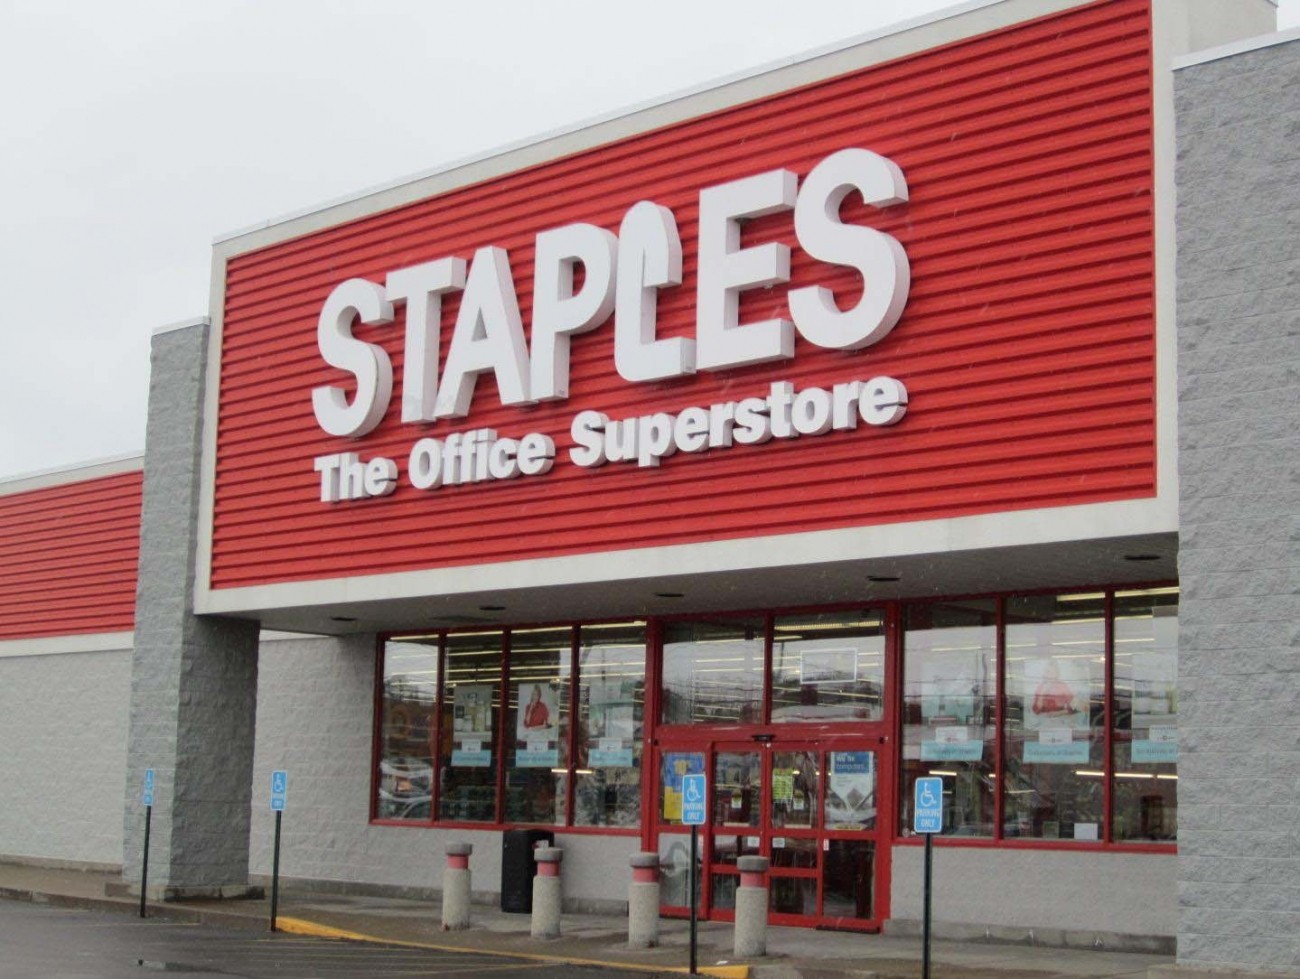 Staples hit by data breach, with customers in Northeast hit